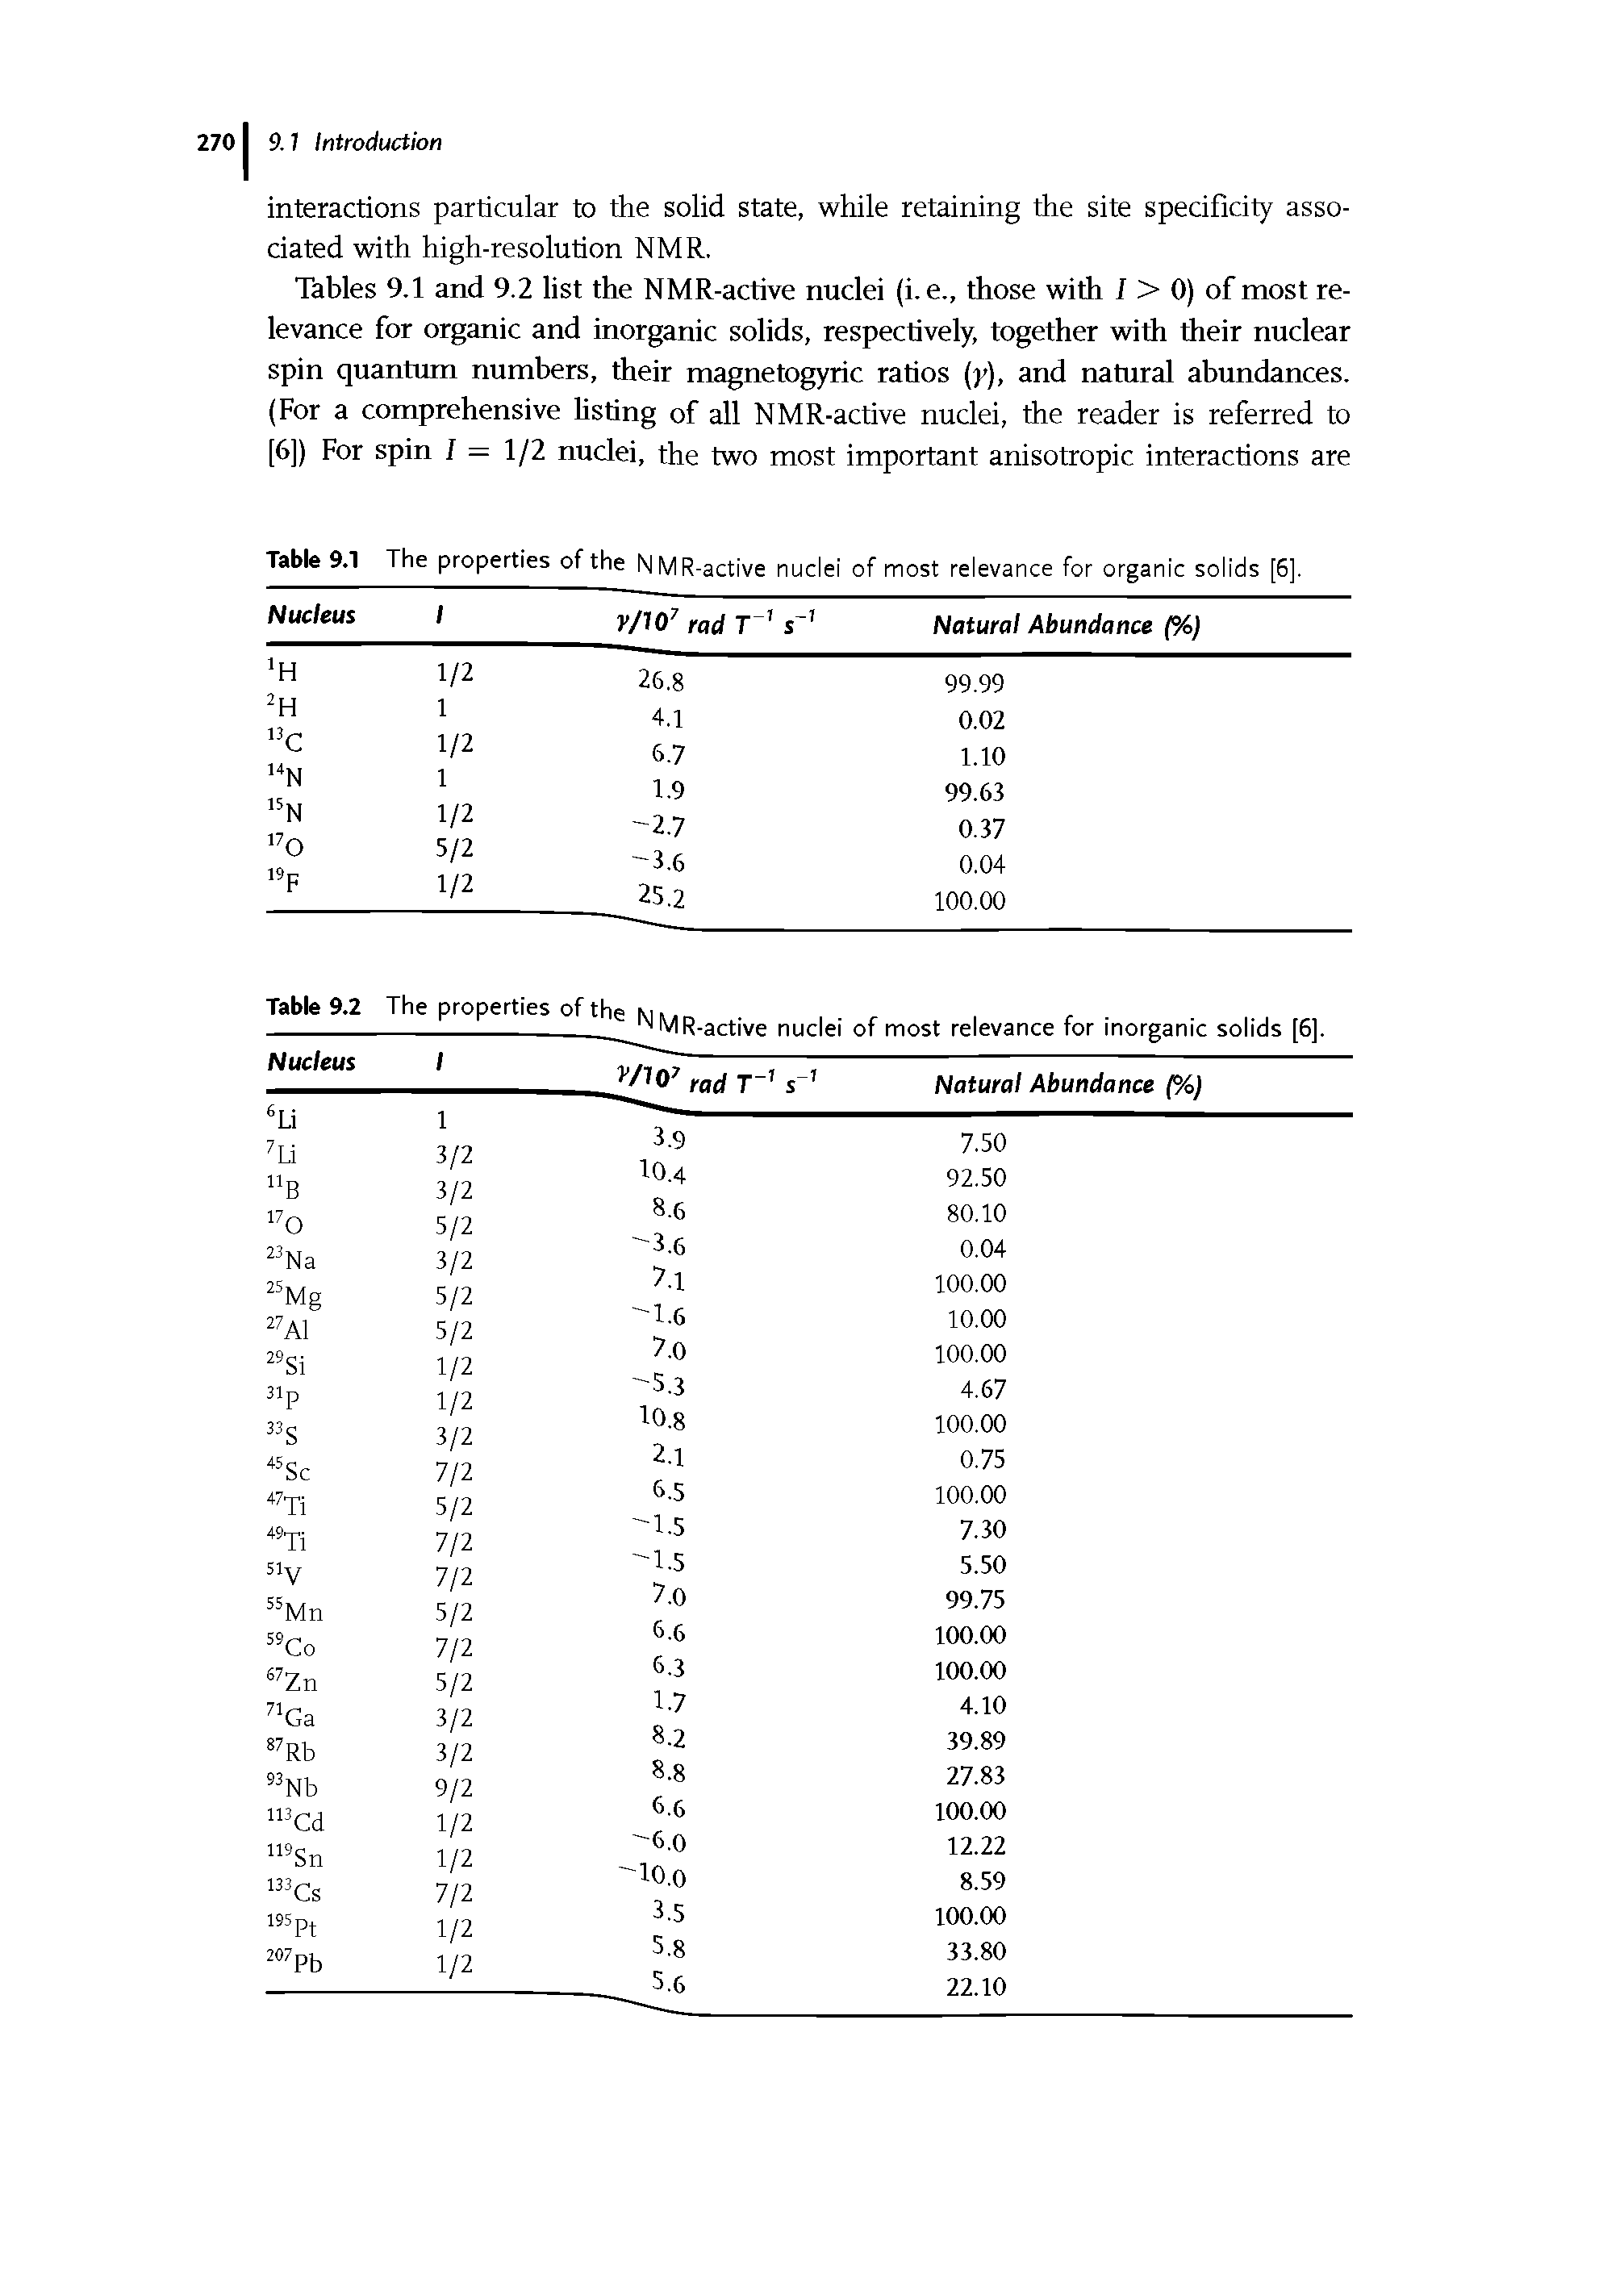 Tables 9.1 and 9.2 list the NMR-active nuclei (i. e., those with 1 > 0) of most relevance for organic and inorganic solids, respectively, together with their nuclear spin quantum numbers, their magnetogyric ratios (y), and natural abundances. (For a comprehensive Hsting of all NMR-active nuclei, the reader is referred to [6]) For spin J = 1/2 nuclei, the two most important anisotropic interactions are...